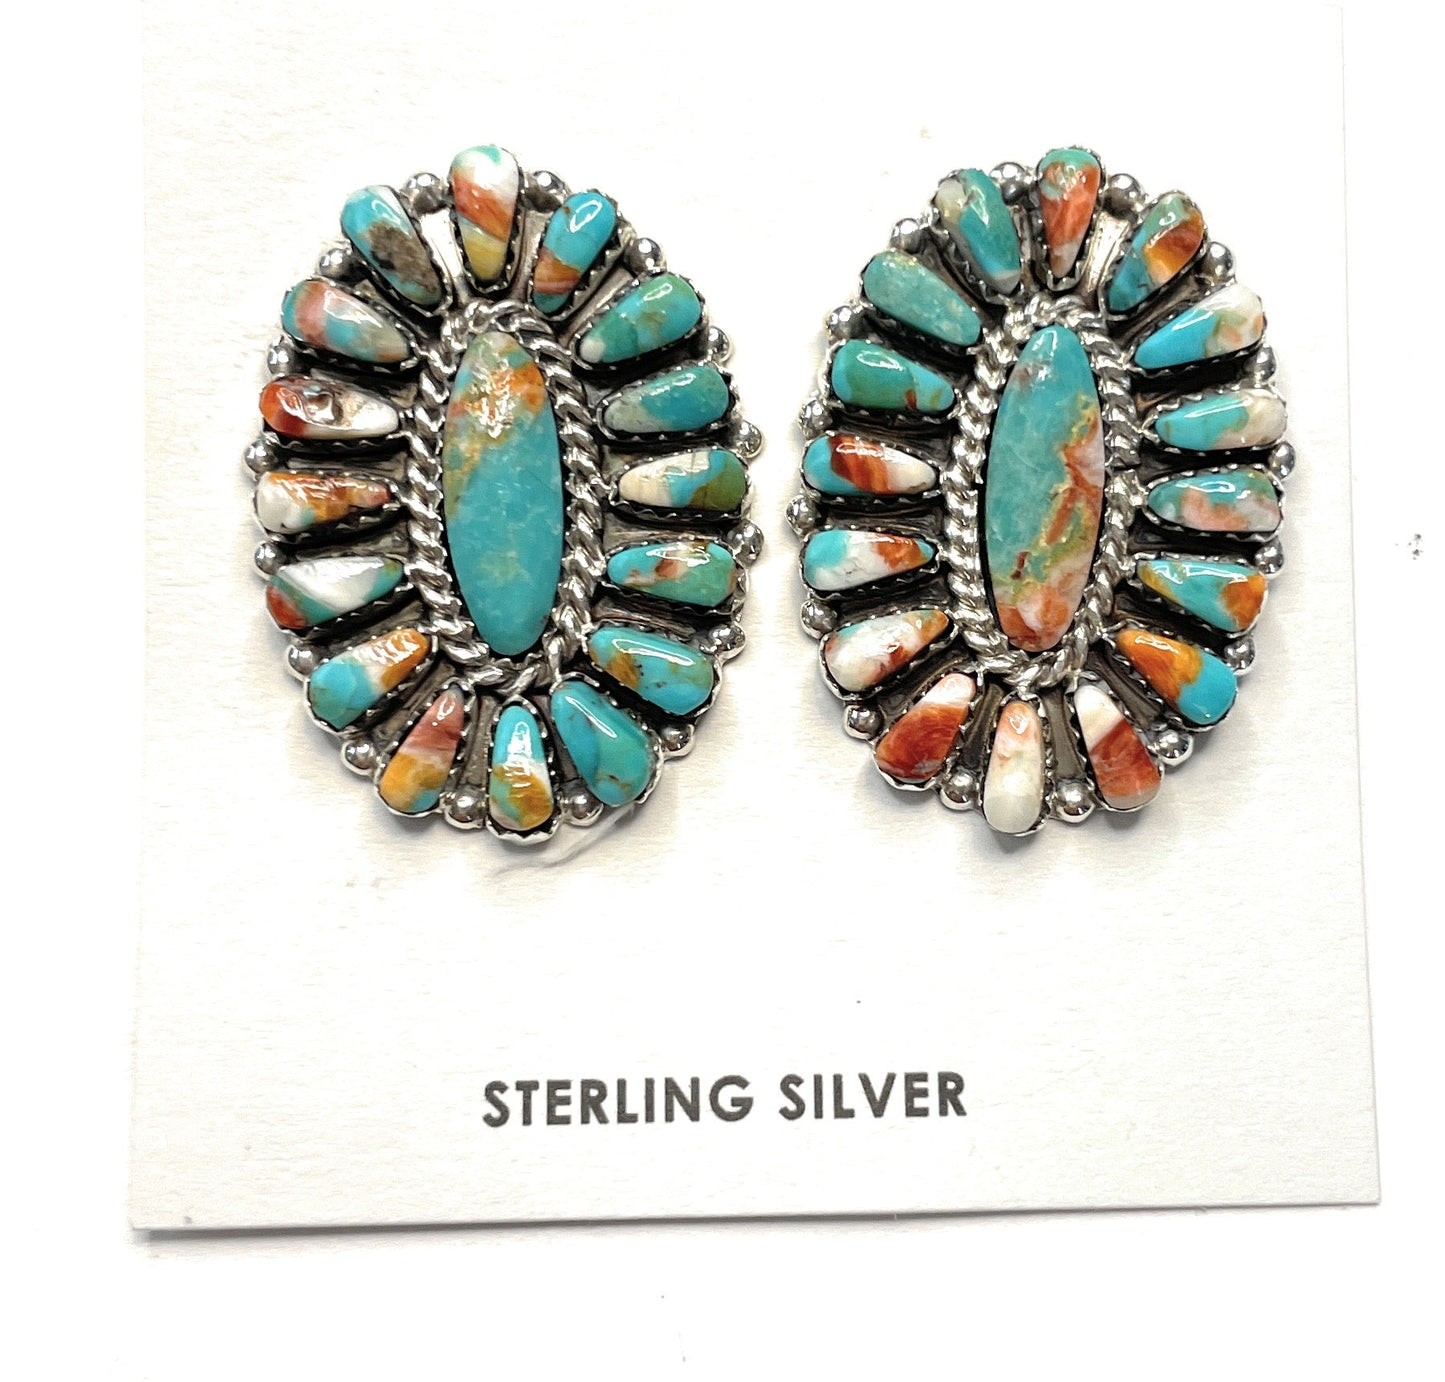 Navajo Sterling Silver And Spice Earrings Signed